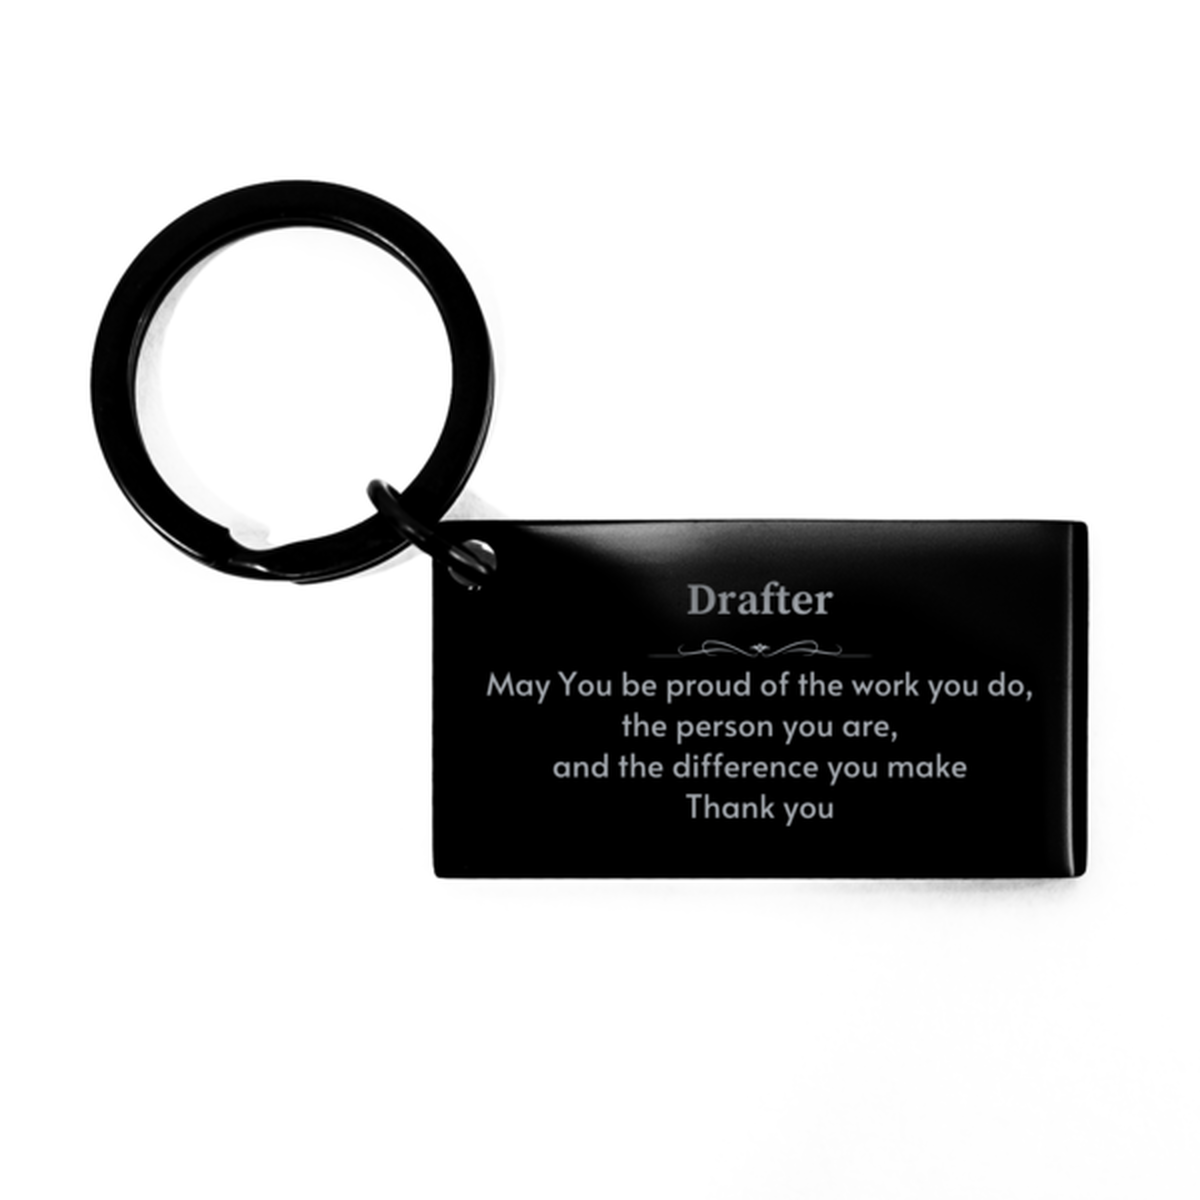 Heartwarming Keychain Retirement Coworkers Gifts for Drafter, Historian May You be proud of the work you do, the person you are Gifts for Boss Men Women Friends